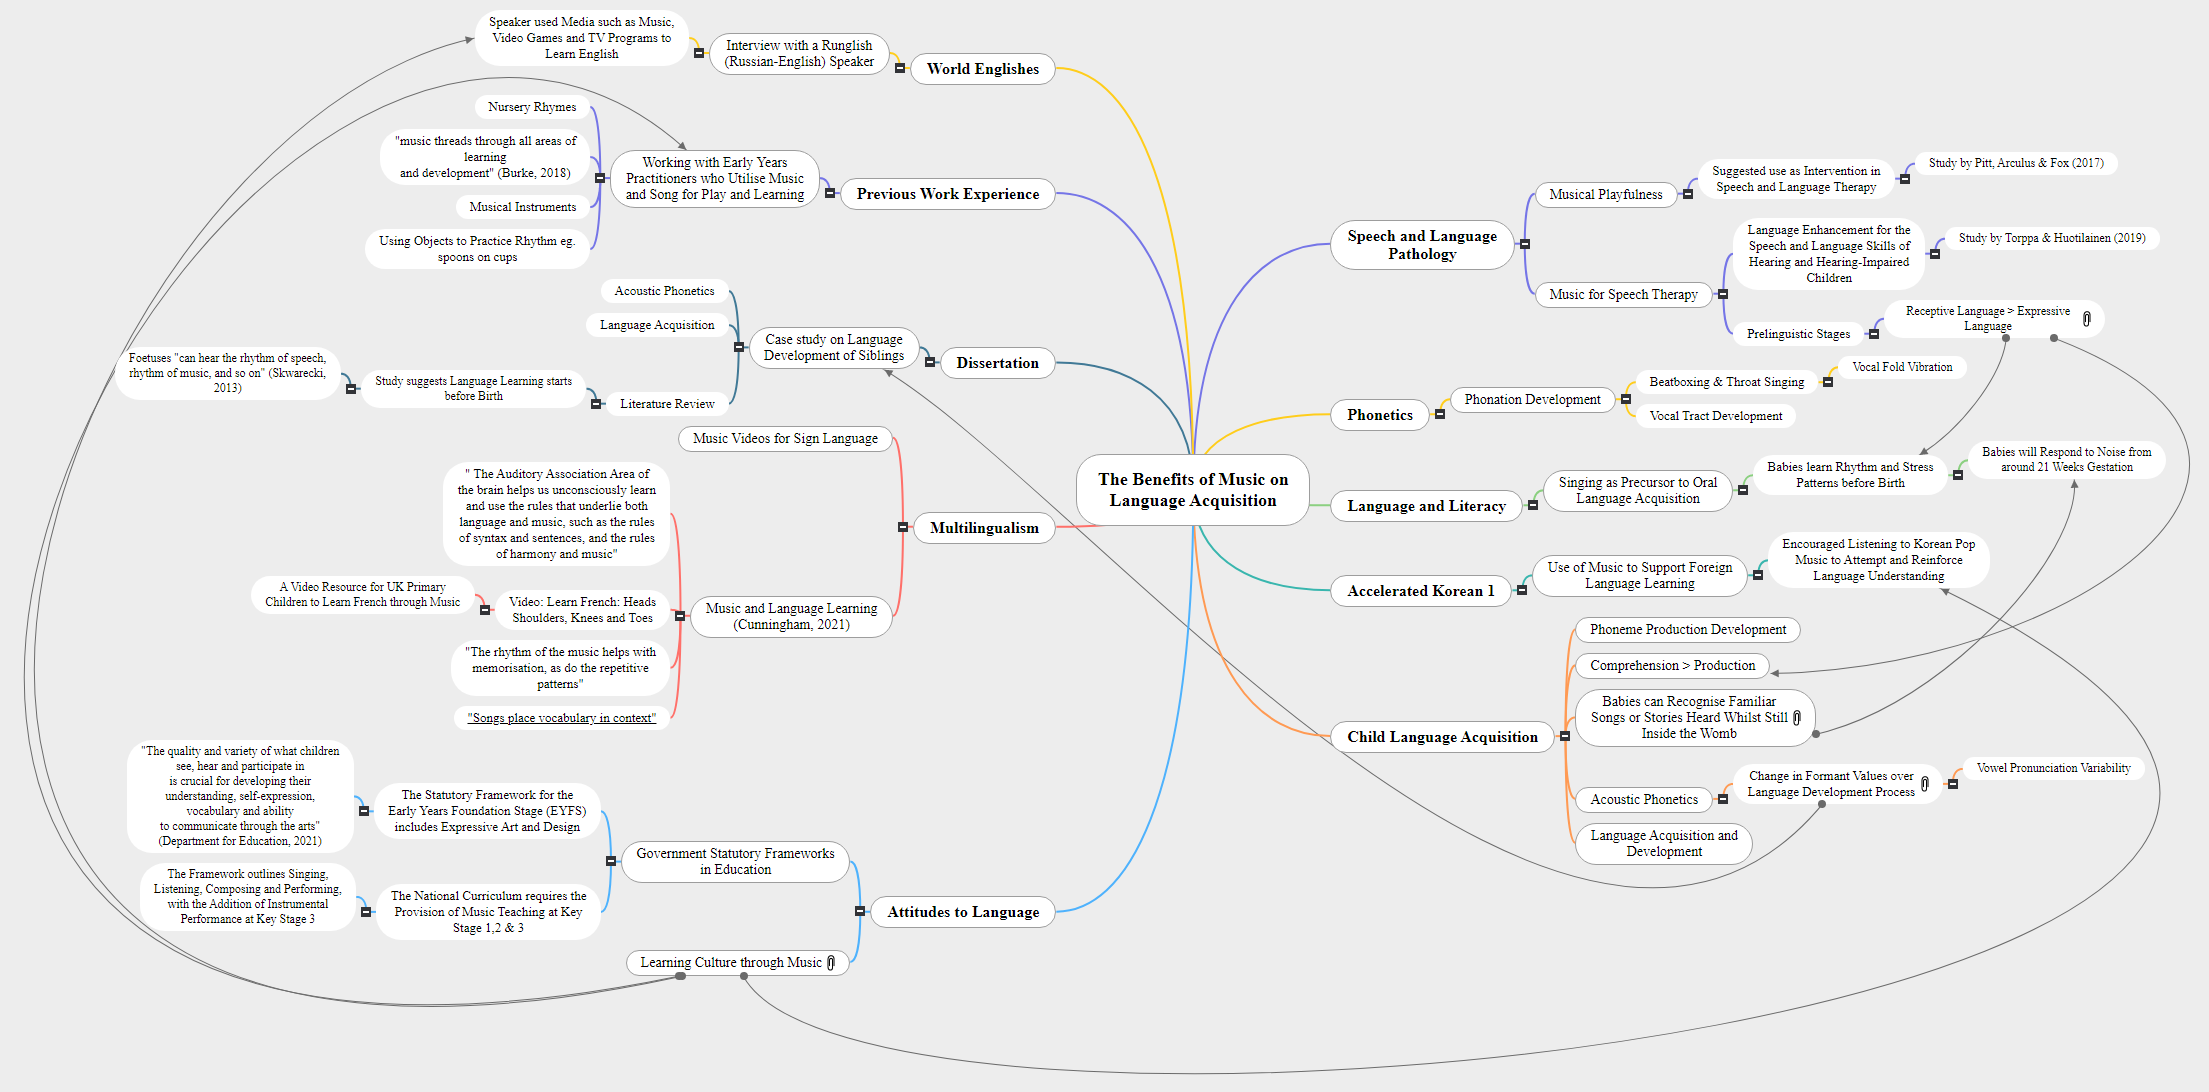 The Benefits of Music on Language Acquisition Mind Map